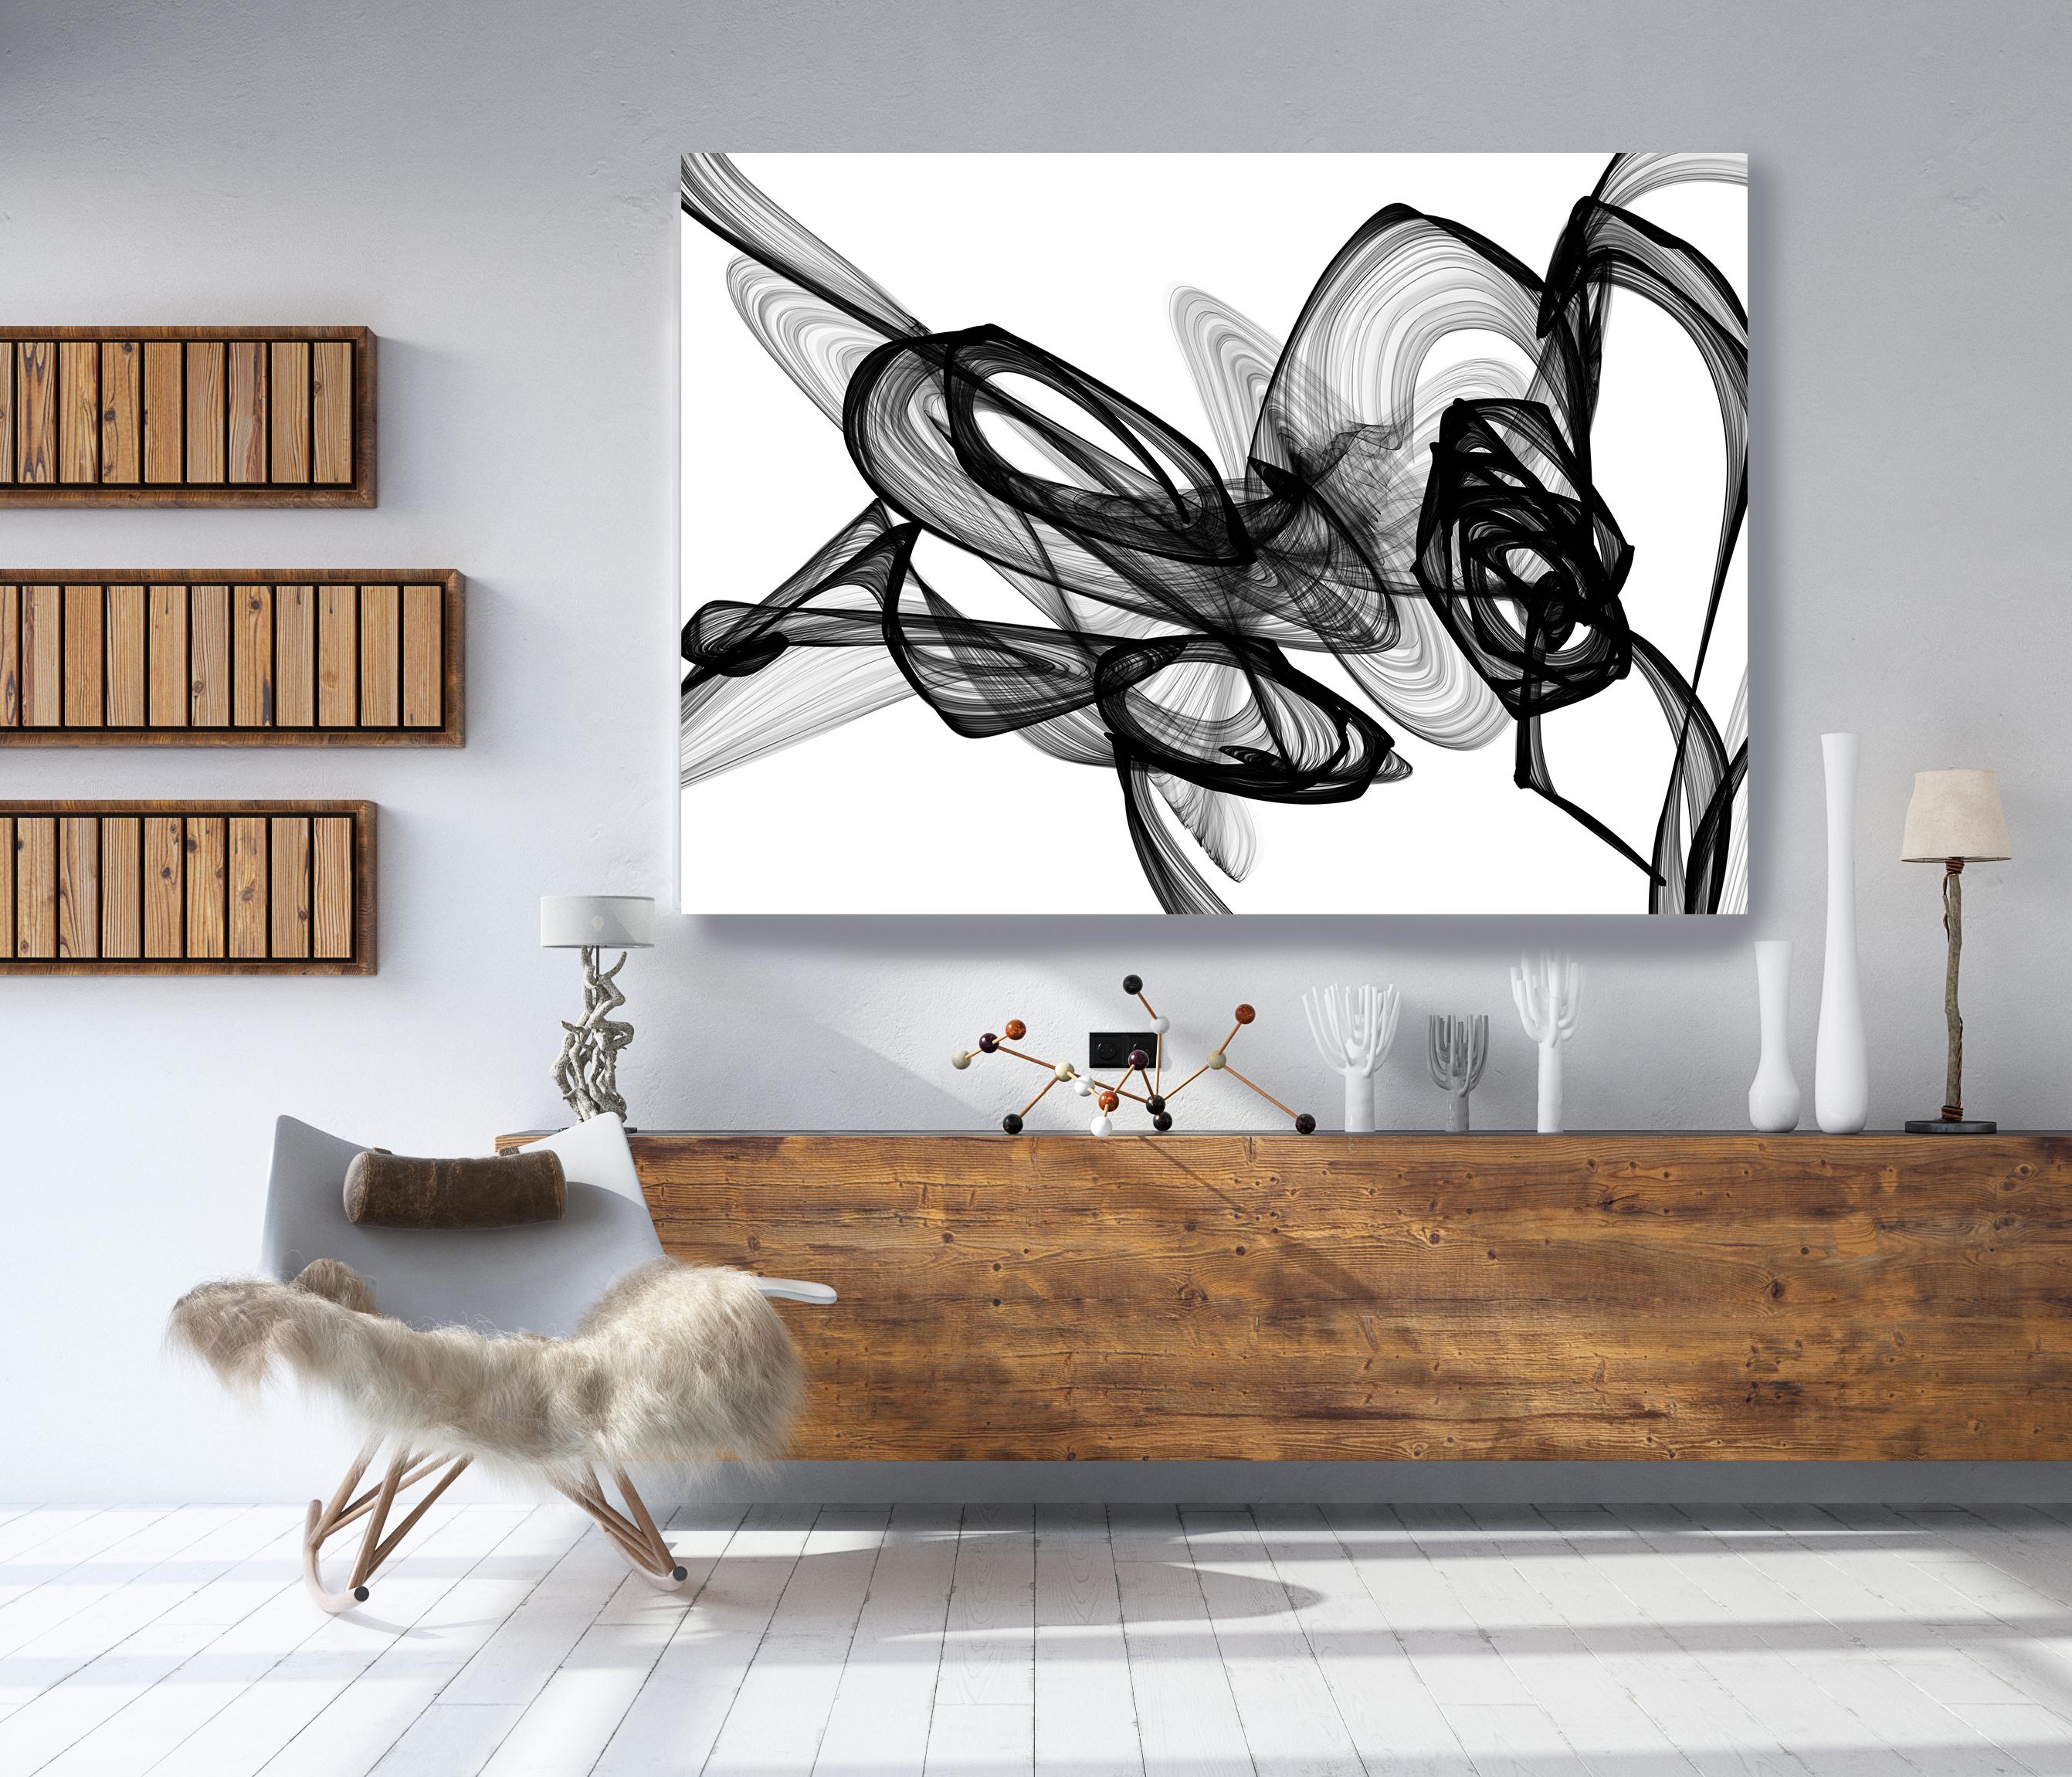 44H x 68W inch, Innovative and Contemporary Original New Media Abstract Black And White Work on Canvas
Minimalist New Media Original Painting on Canvas

❘❘❙❙❚❚ Invest in original paintings today! ❘❙❙❚❚  Discover Art You Love. 
Start and build your